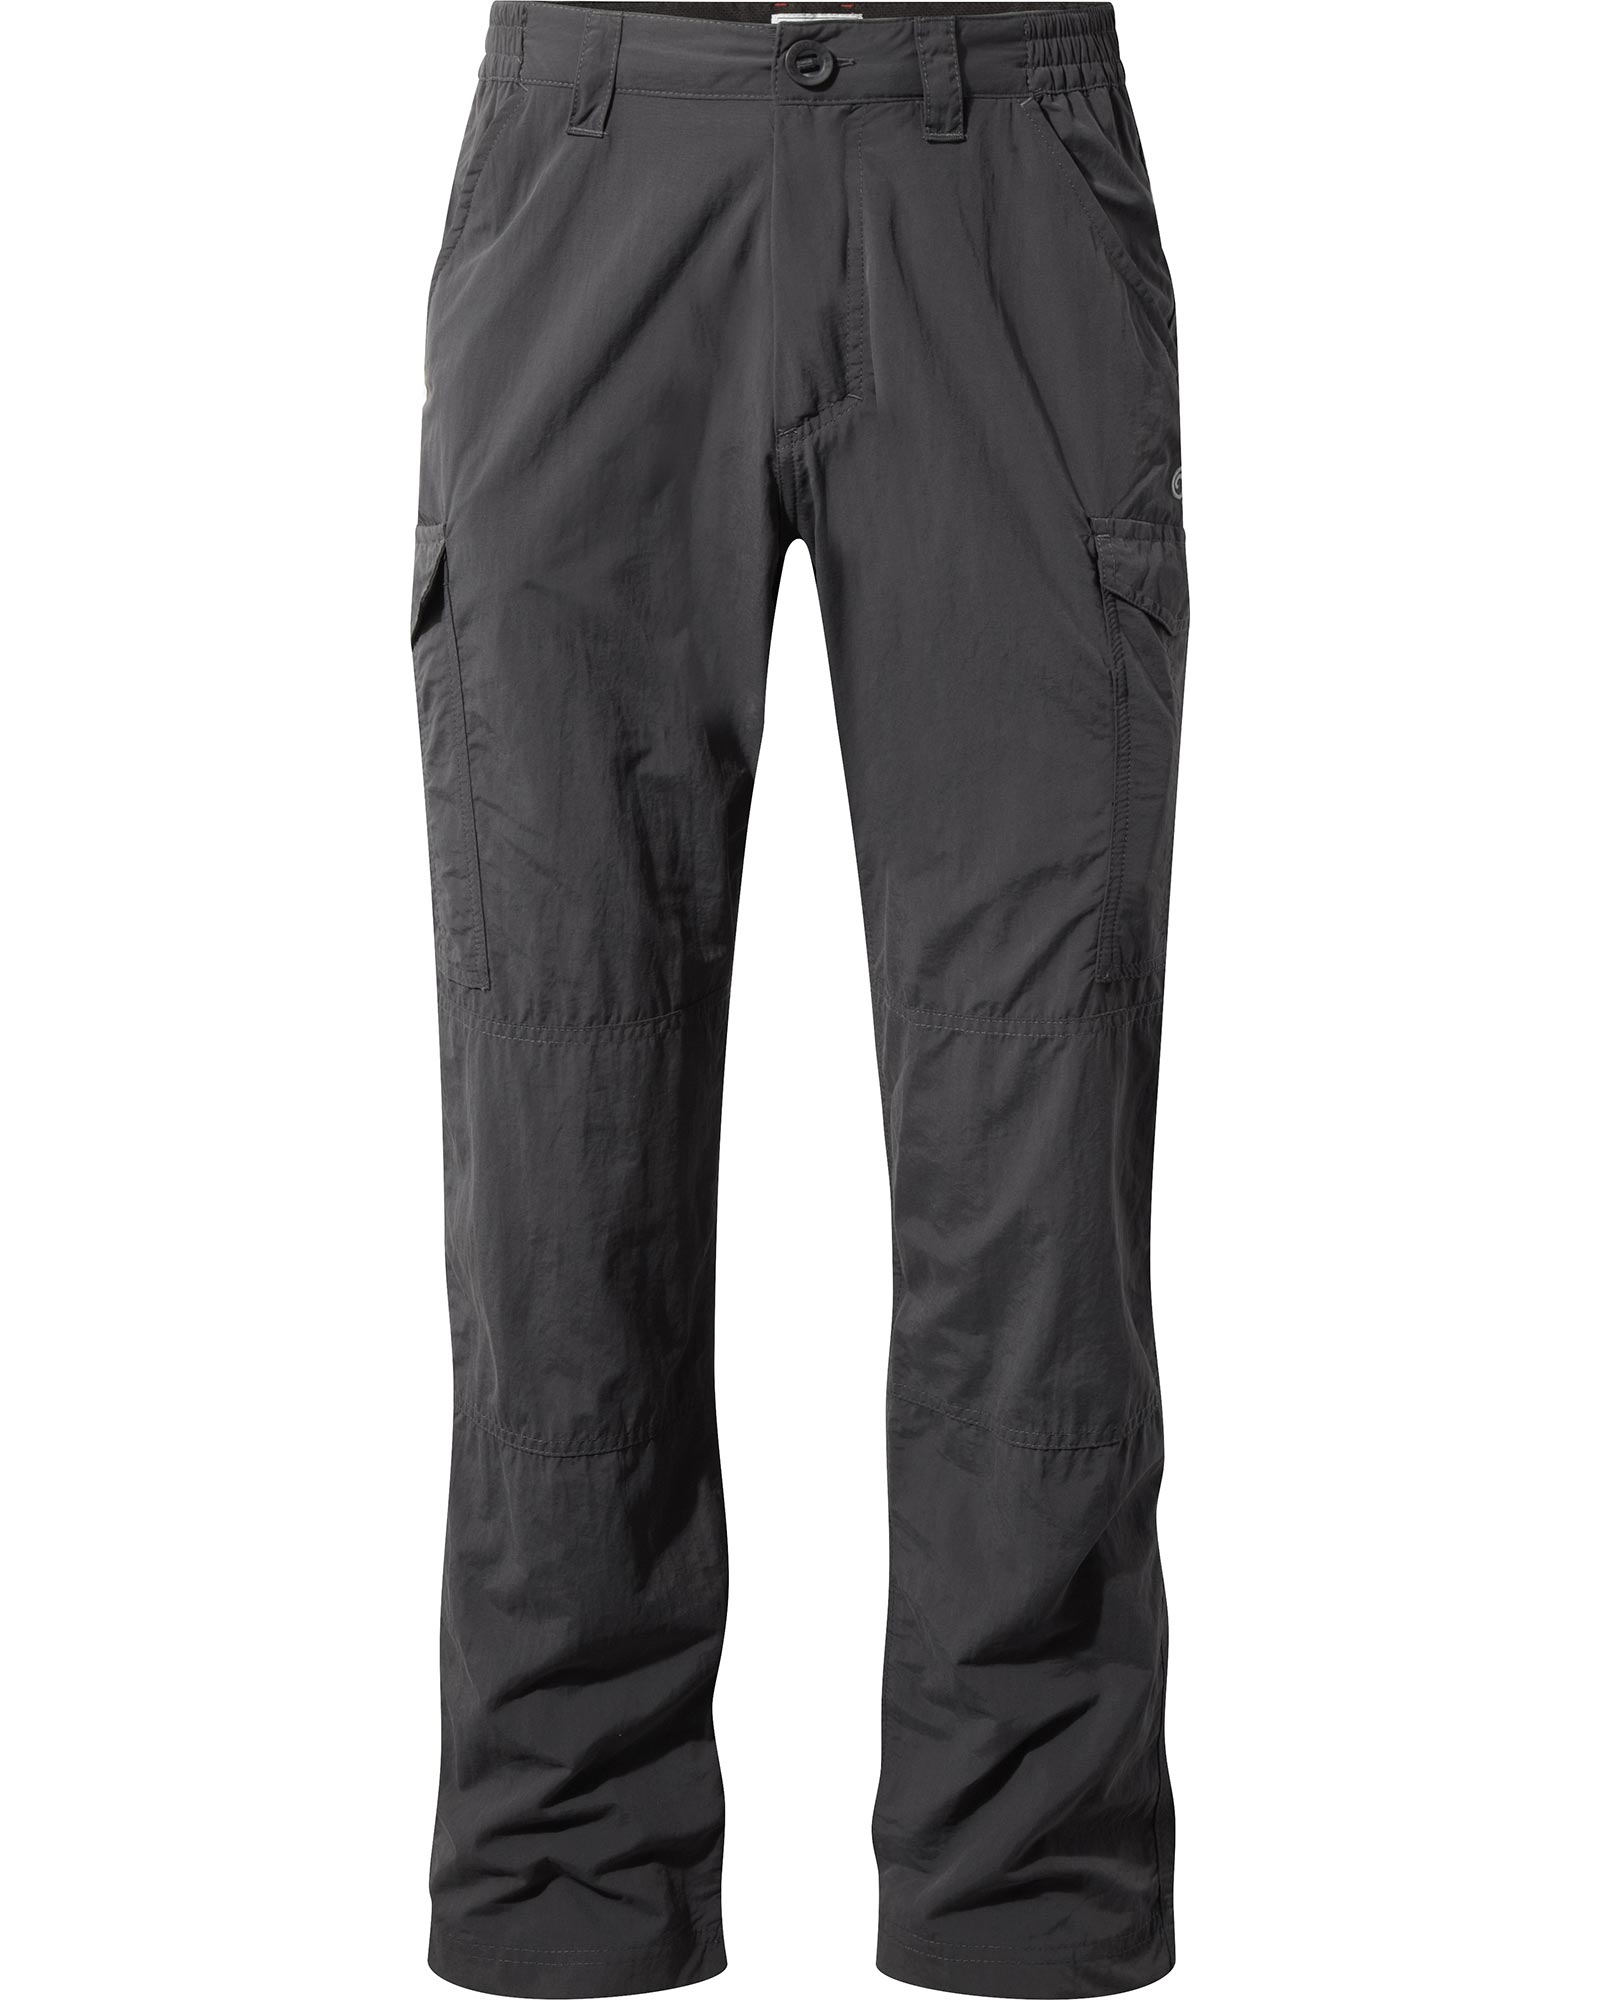 Craghoppers Nosilife Cargo Mens Trousers